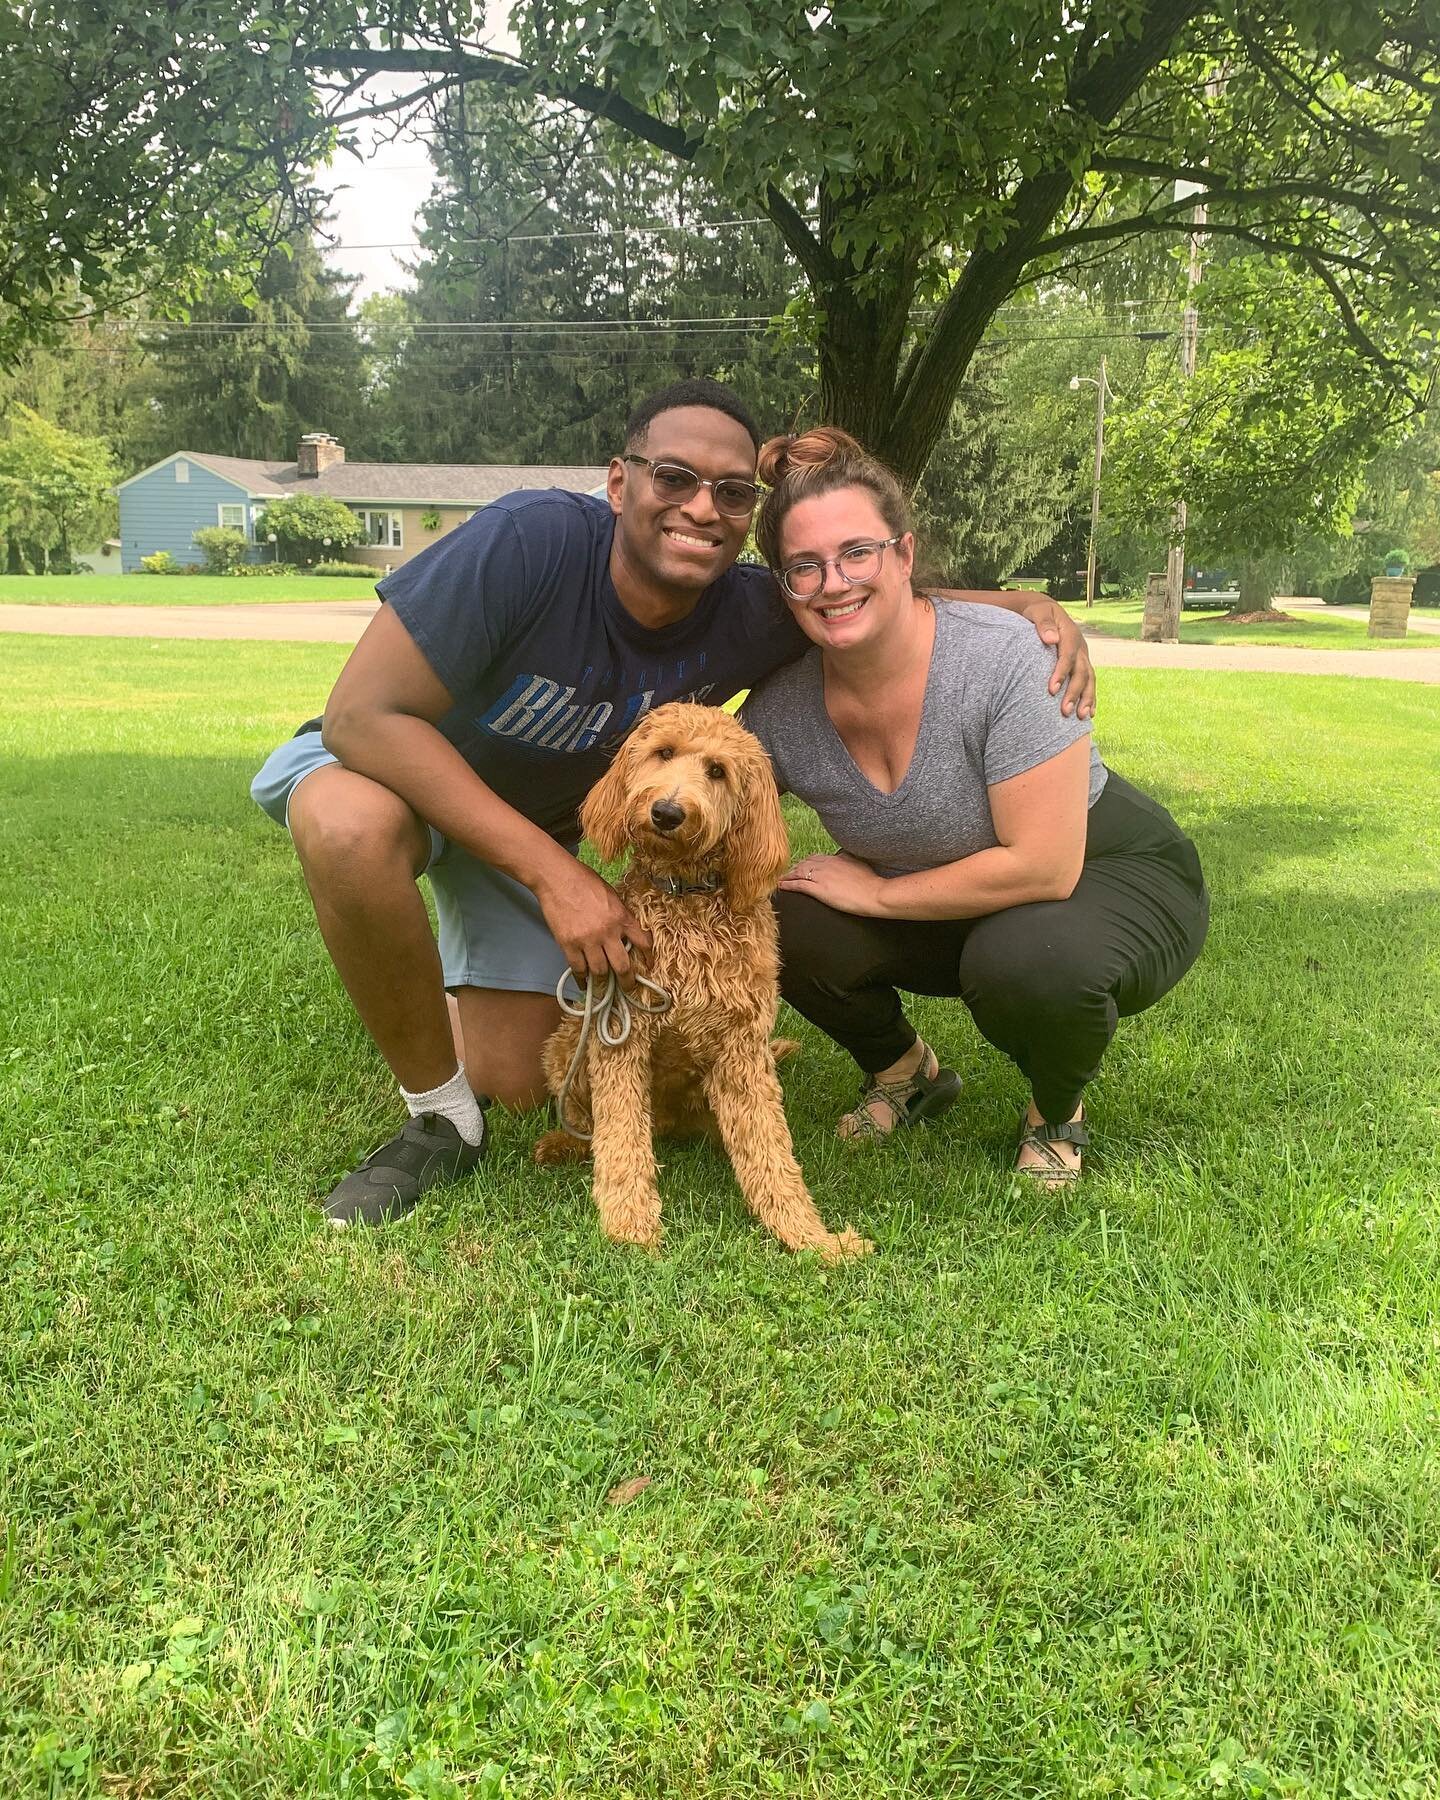 Bye bye walty!

I know your going to do amazing and be the best doggy in the world! He has done SO good at such a young age, anything is possible for mr. Walter.

www.consciouscaninetraining.com

#dogsofinstagram #instadog #dogtraining #instagood #do